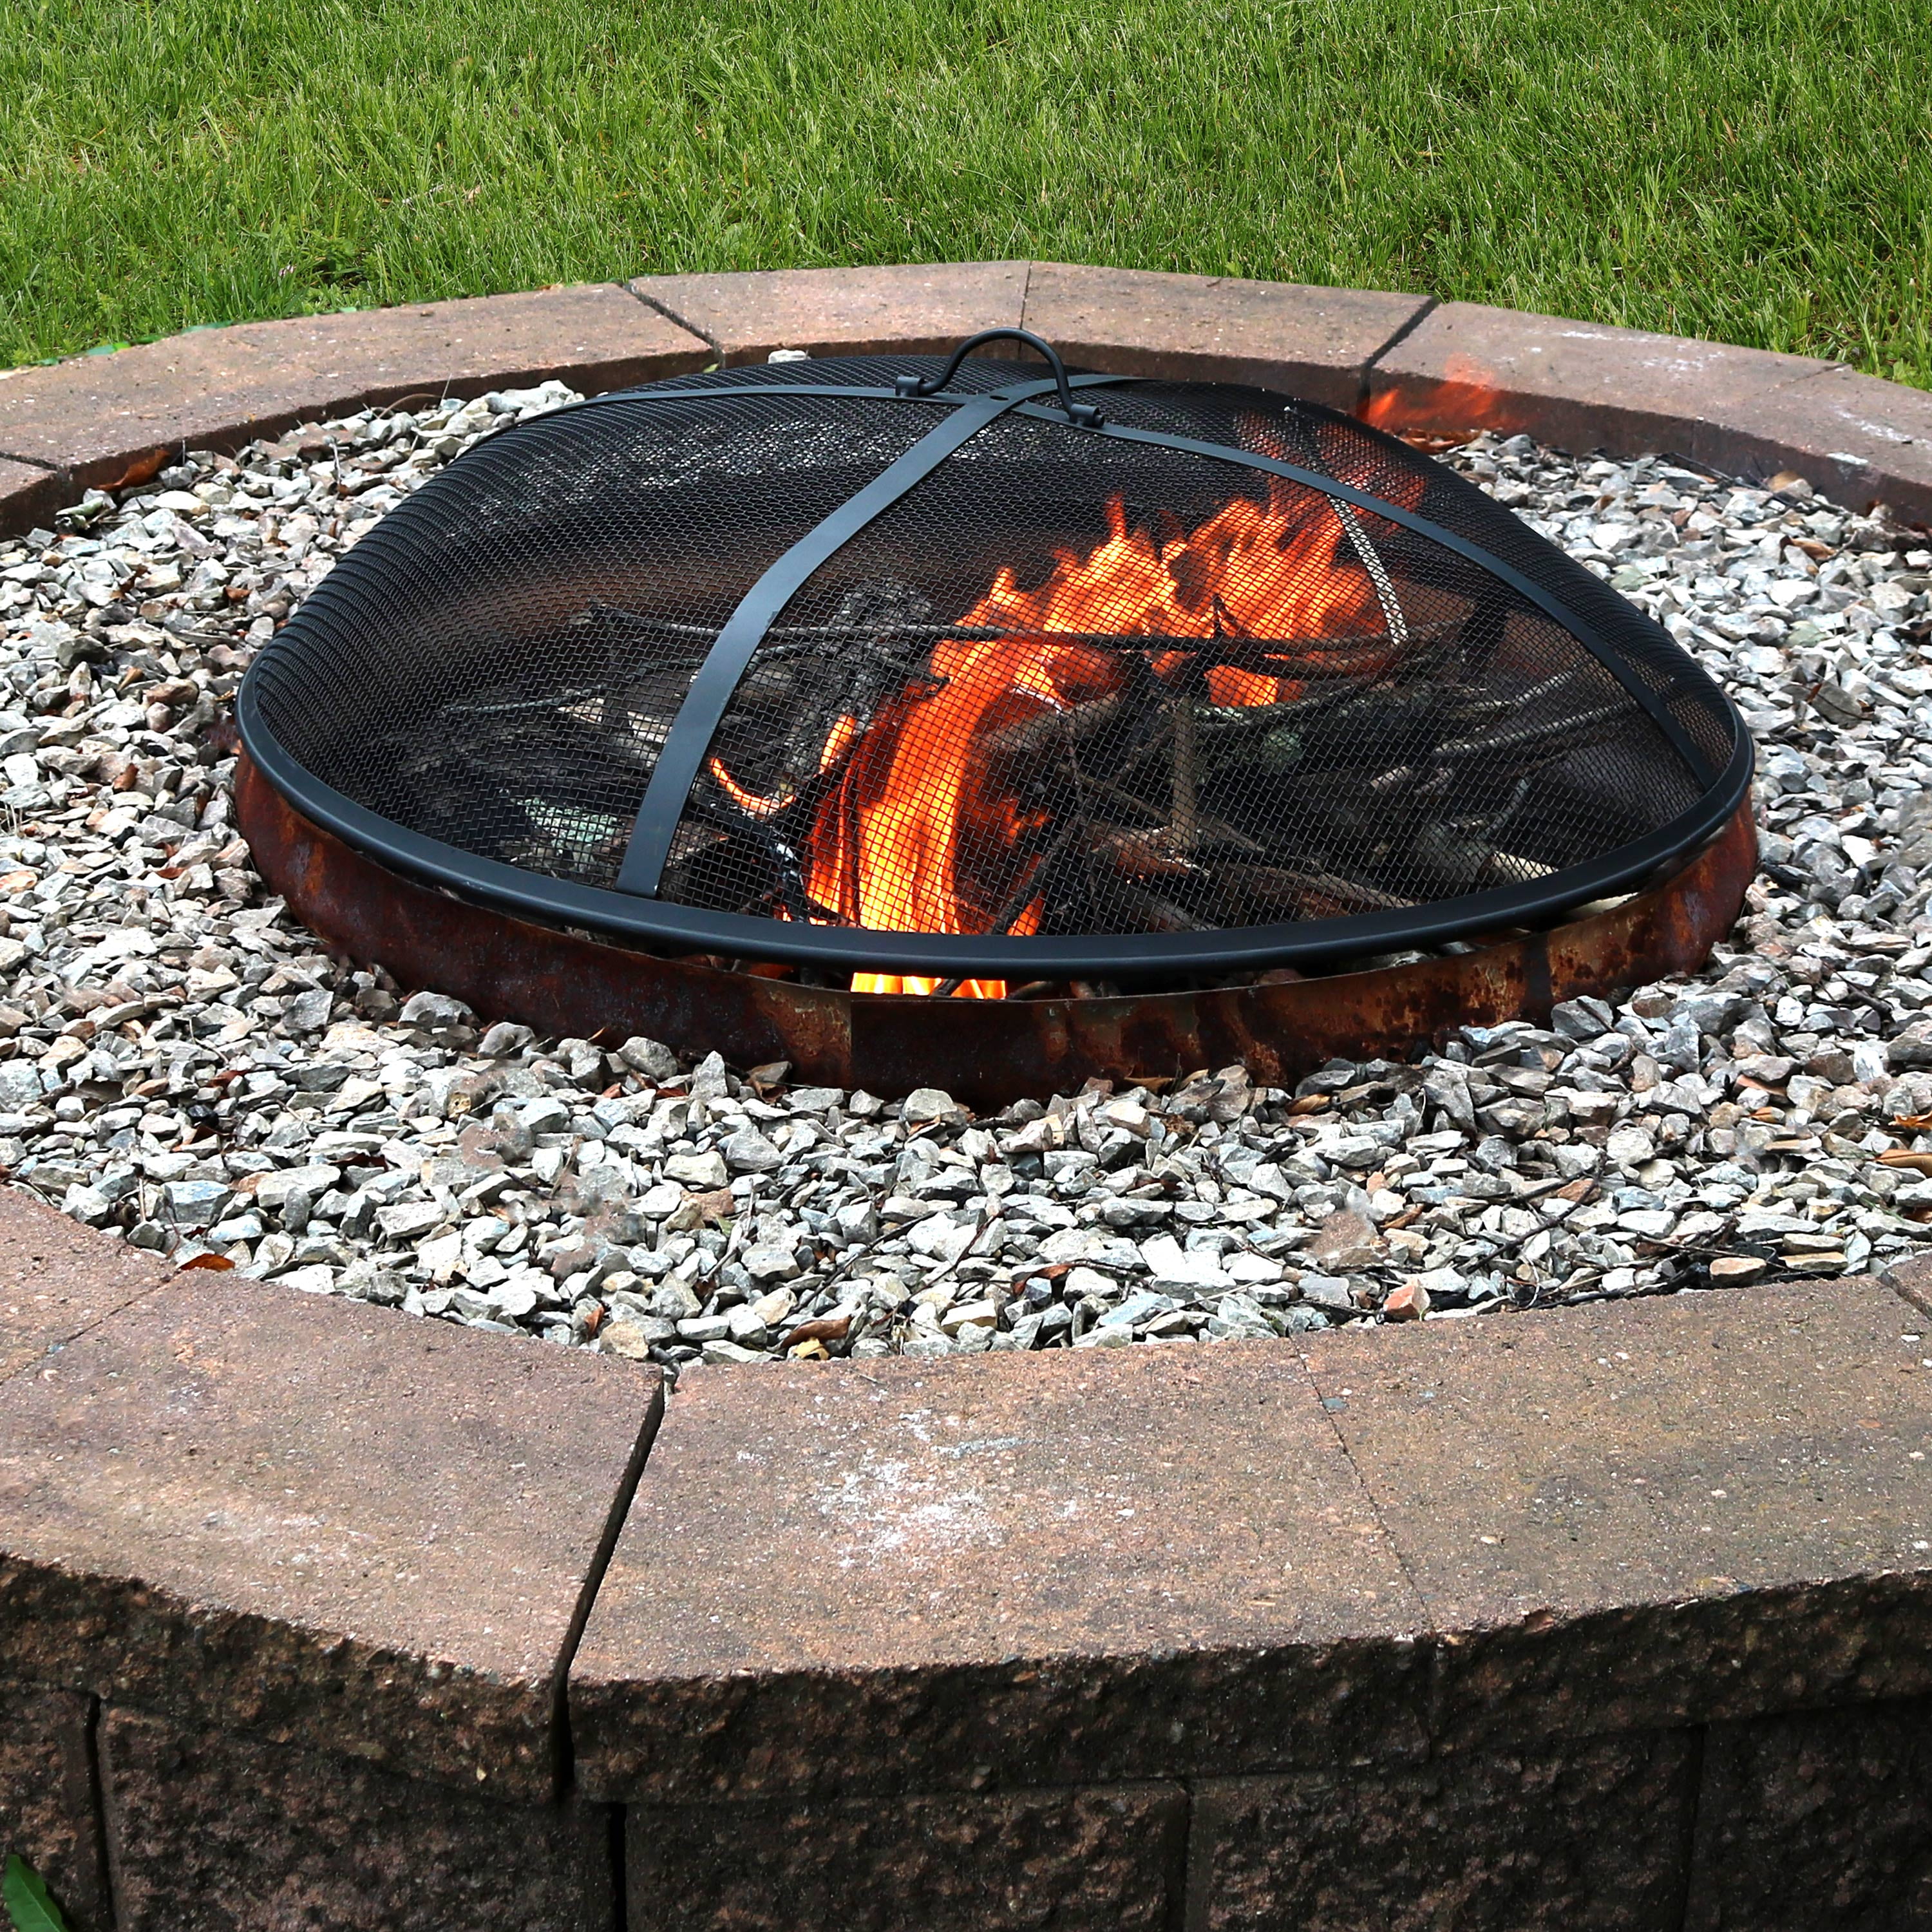 Sunnydaze Outdoor Fire Pit Spark Screen, Red Ember Gas Crossweave Fire Pit Bowl